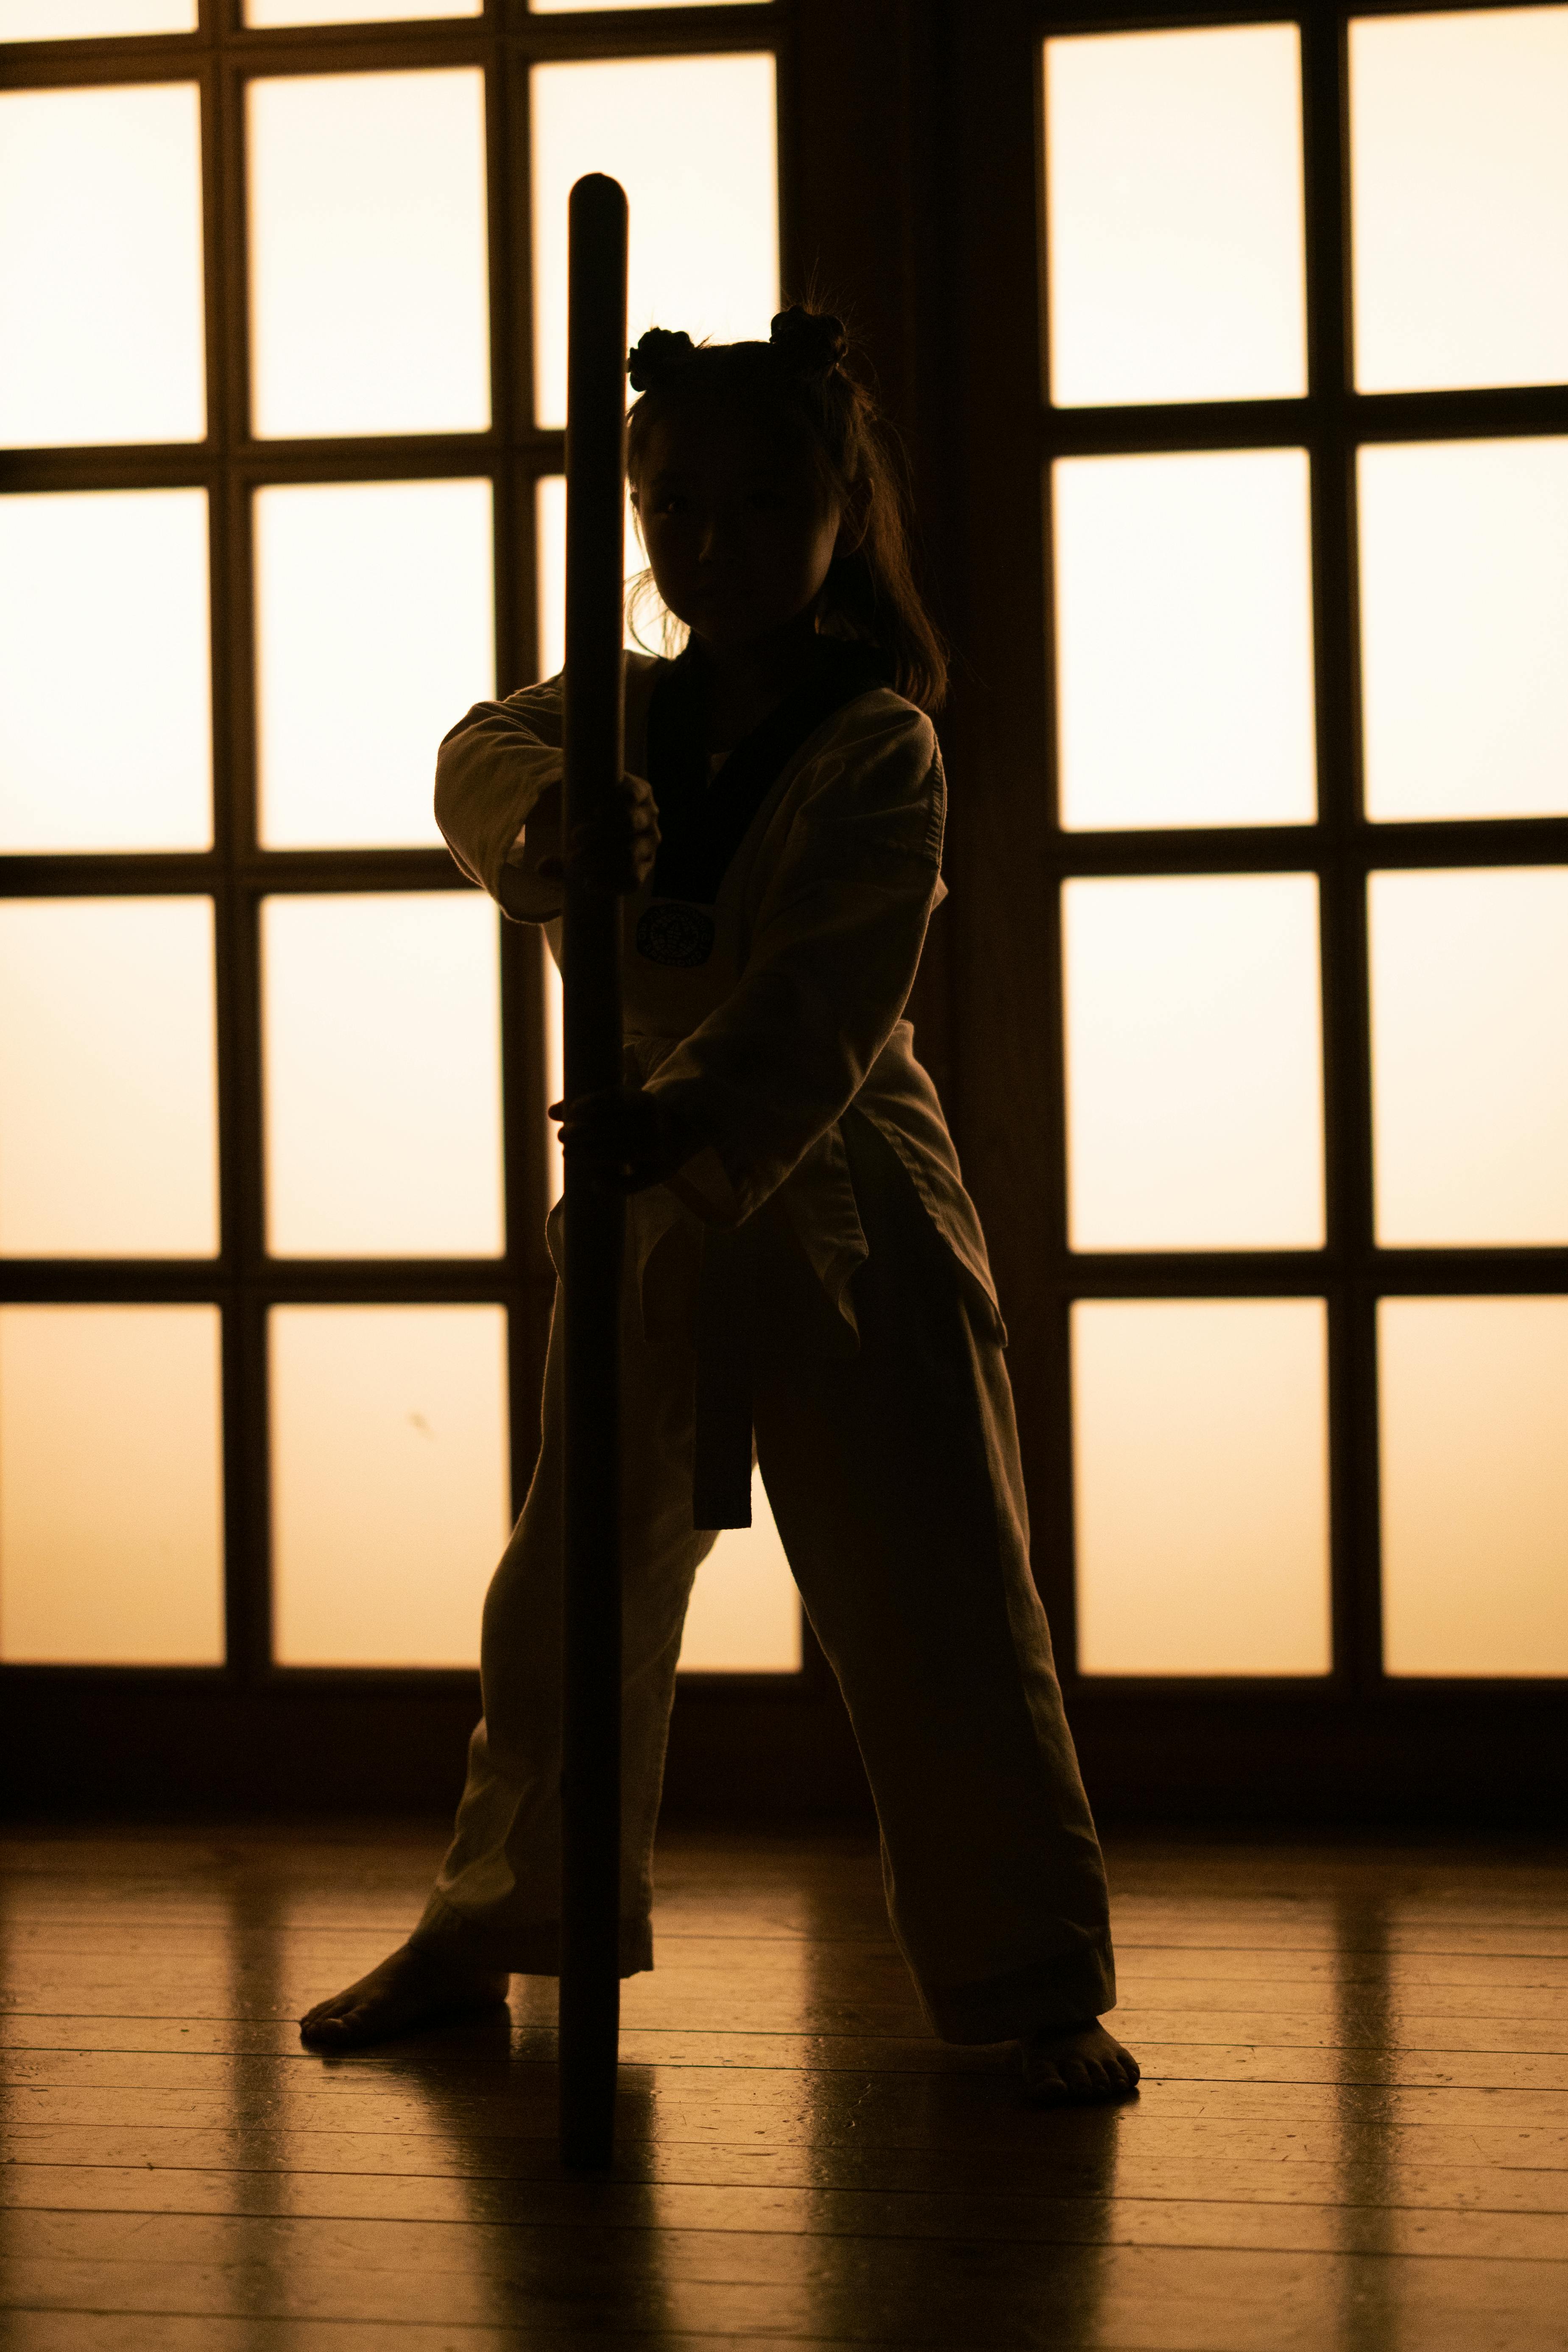 Download wallpaper 800x1200 karate silhouette sunset hill iphone 4s4  for parallax hd background